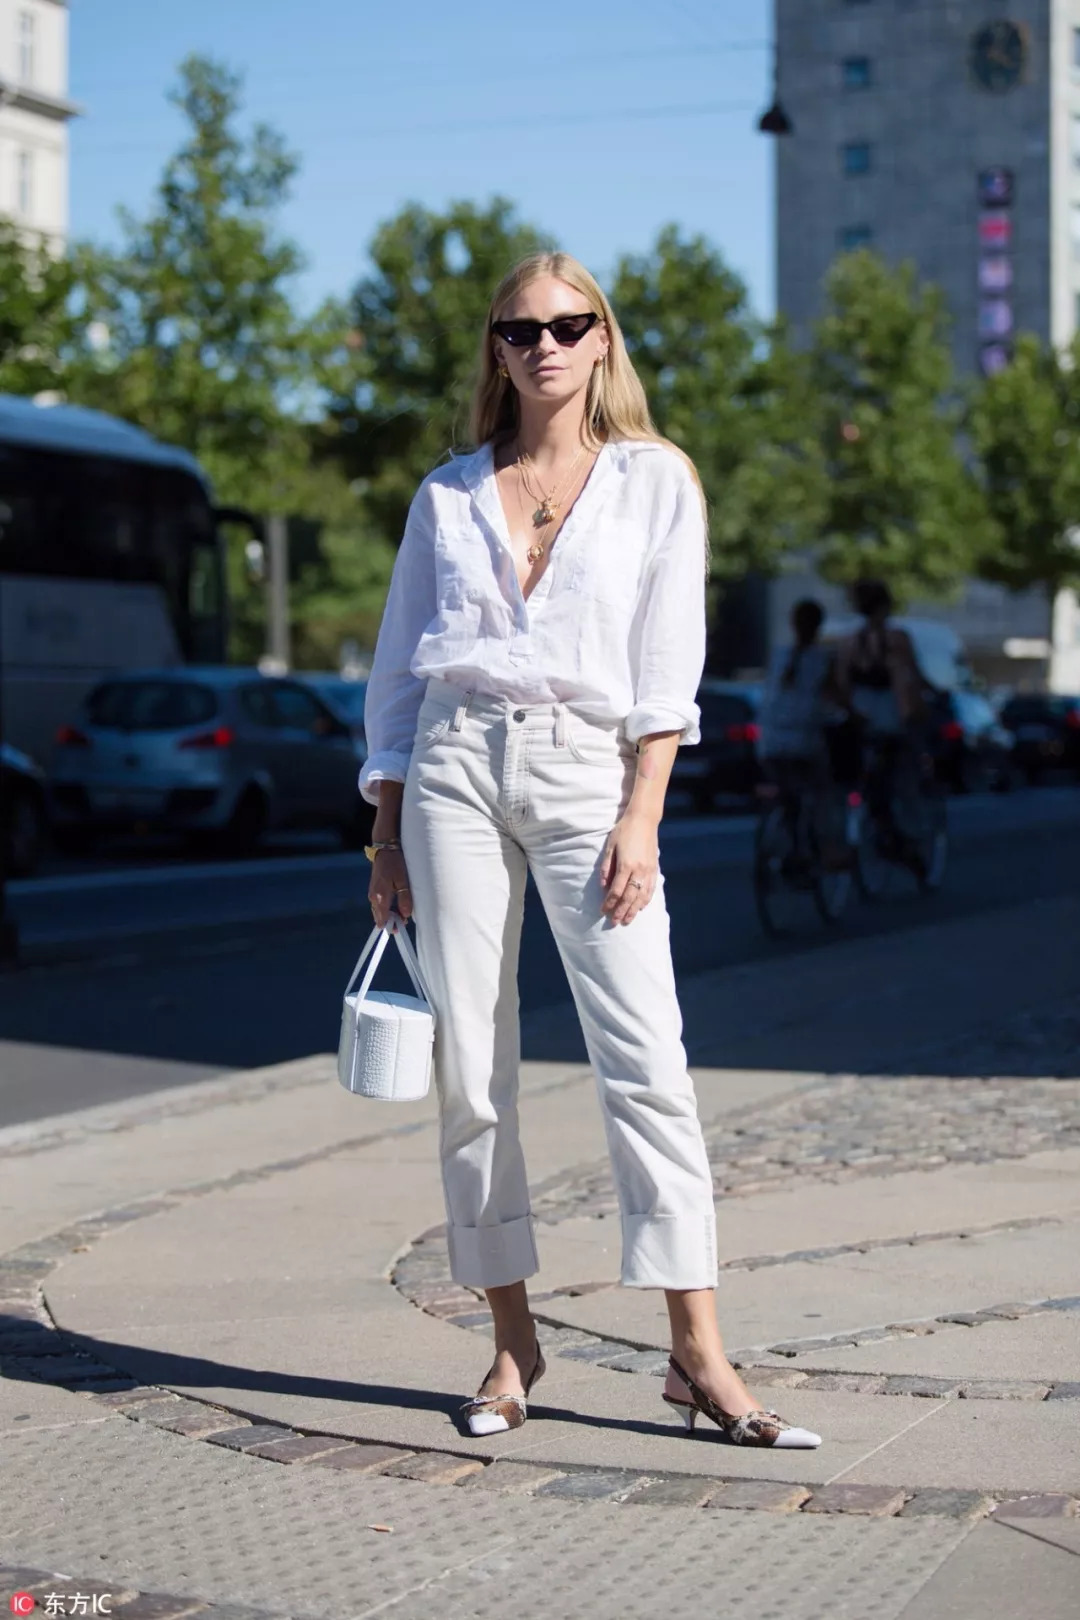 White Mom Jeans Style - Wholesale7 Blog - Latest Fashion News And Trends